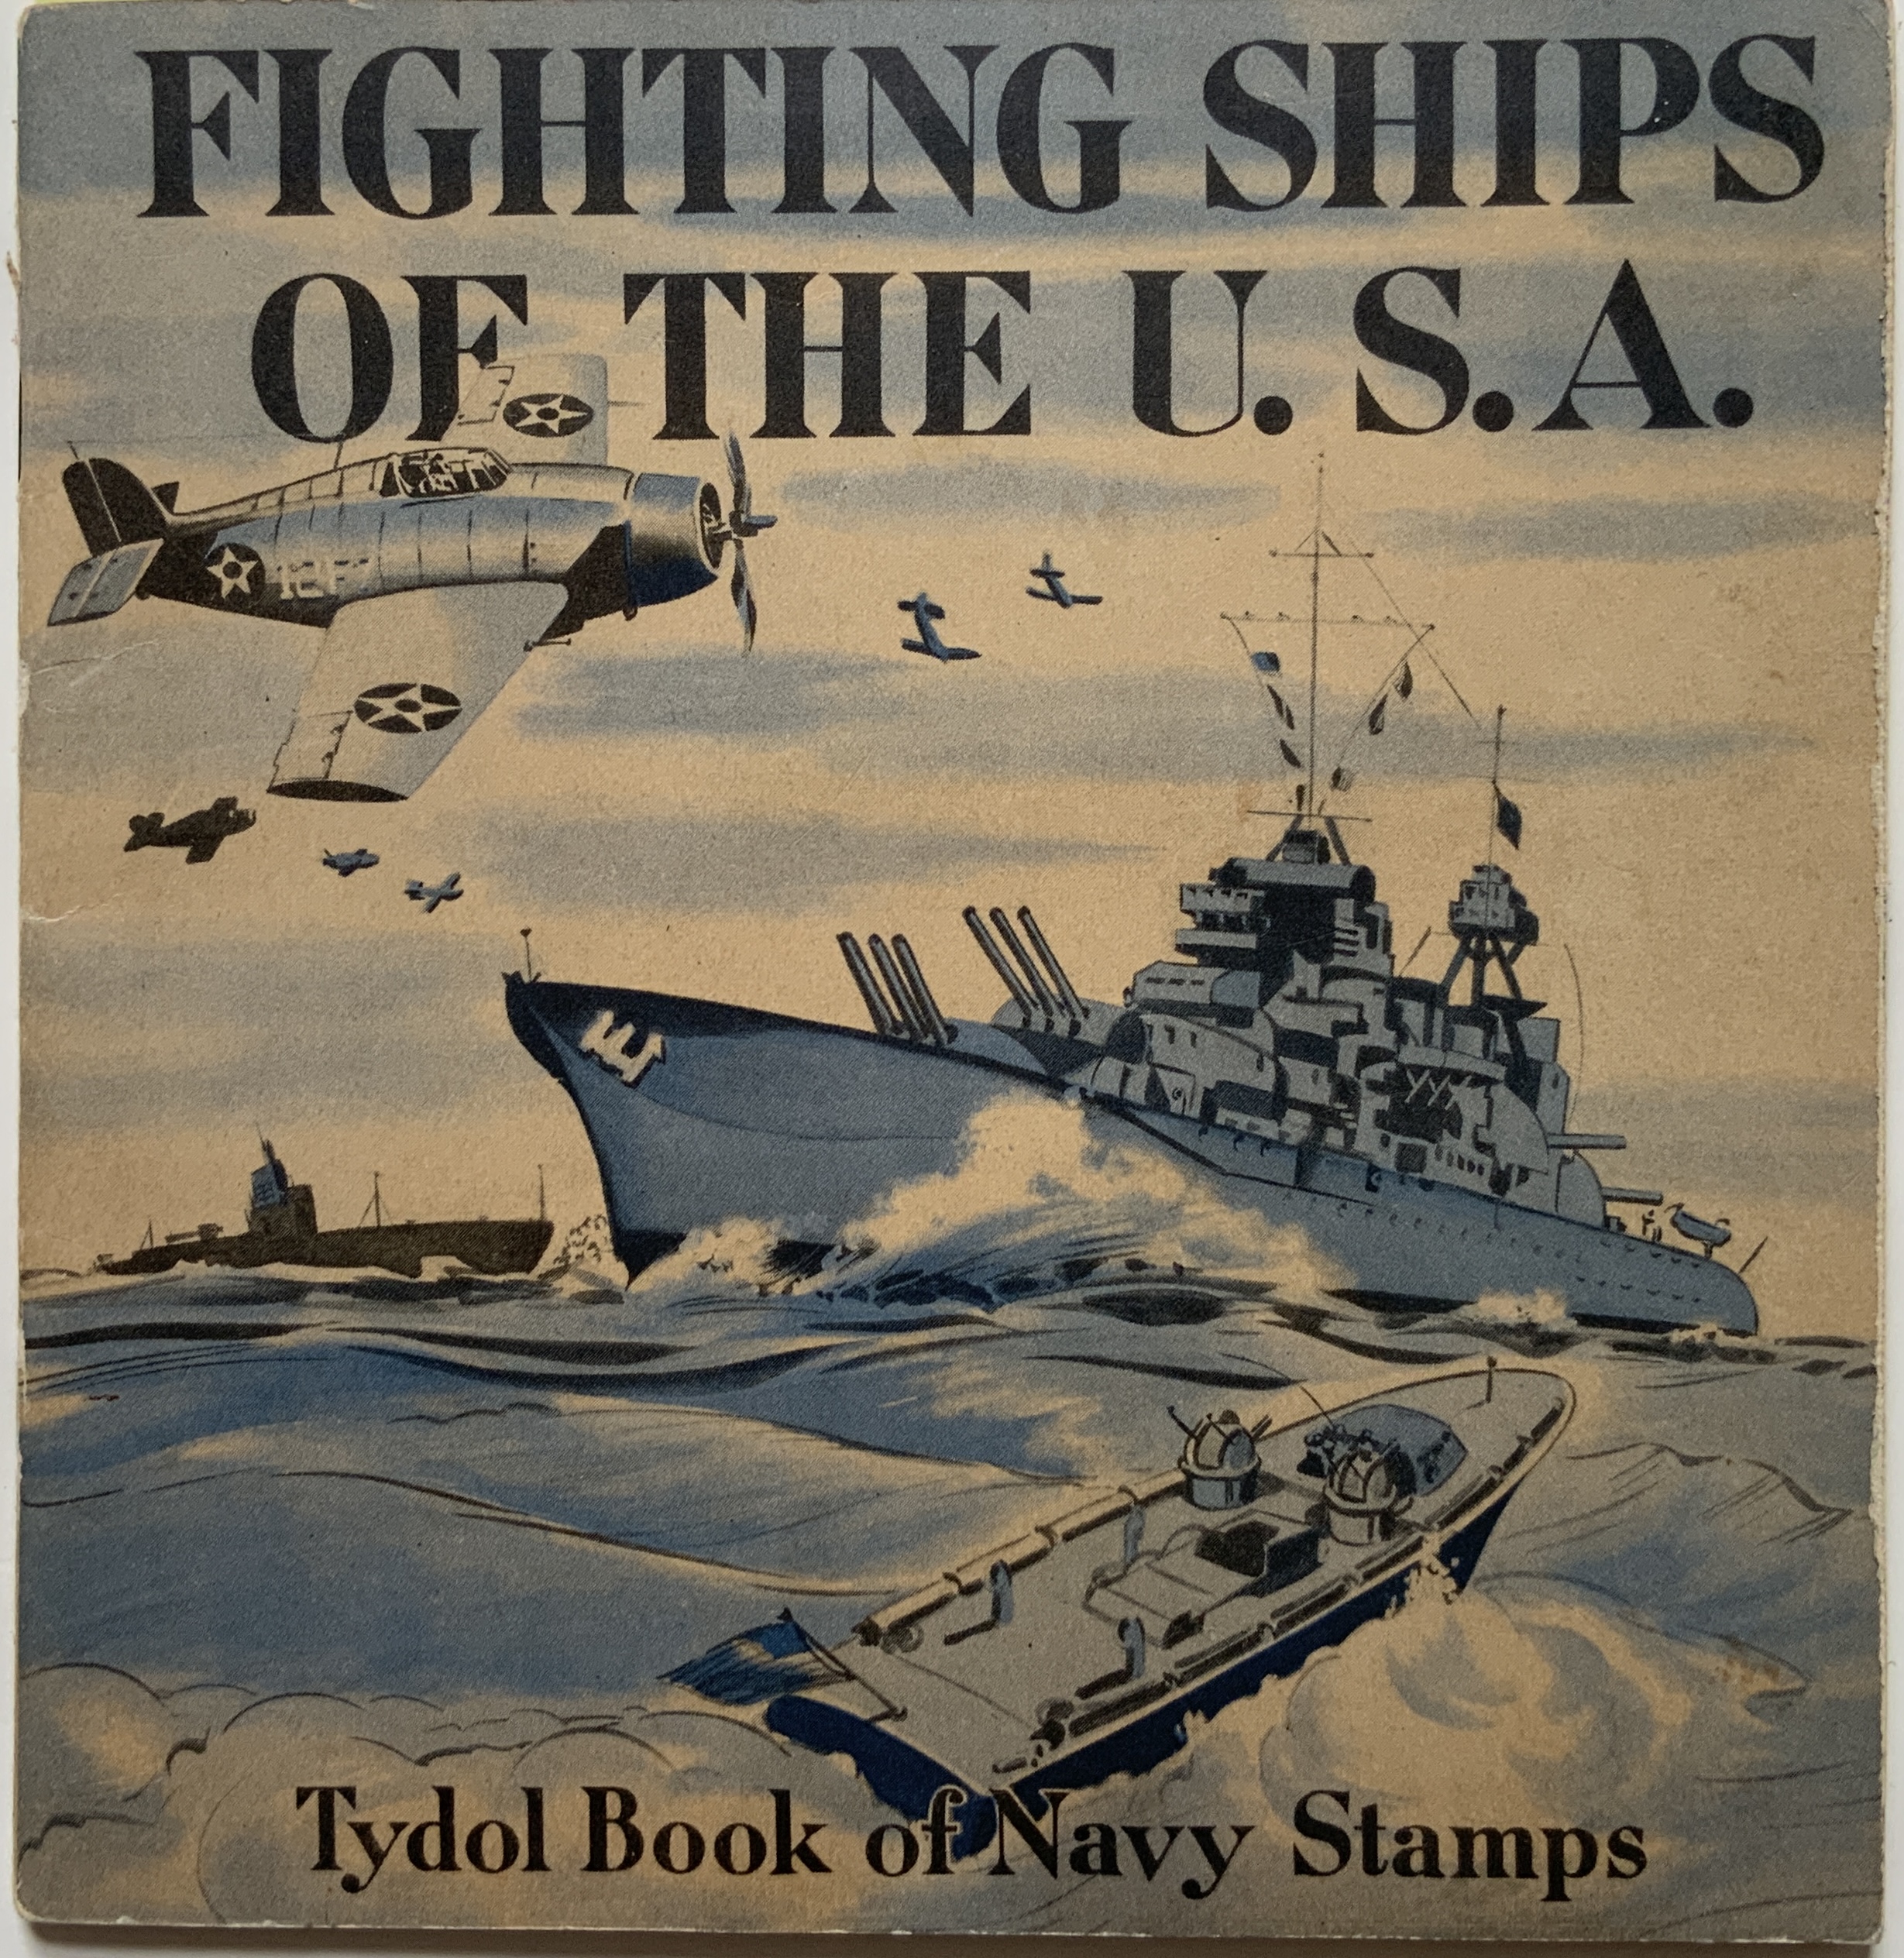 M352	FIGHTING SHIPS OF THE U.S.A. - TYDOL BOOK OF NAVY STAMPS